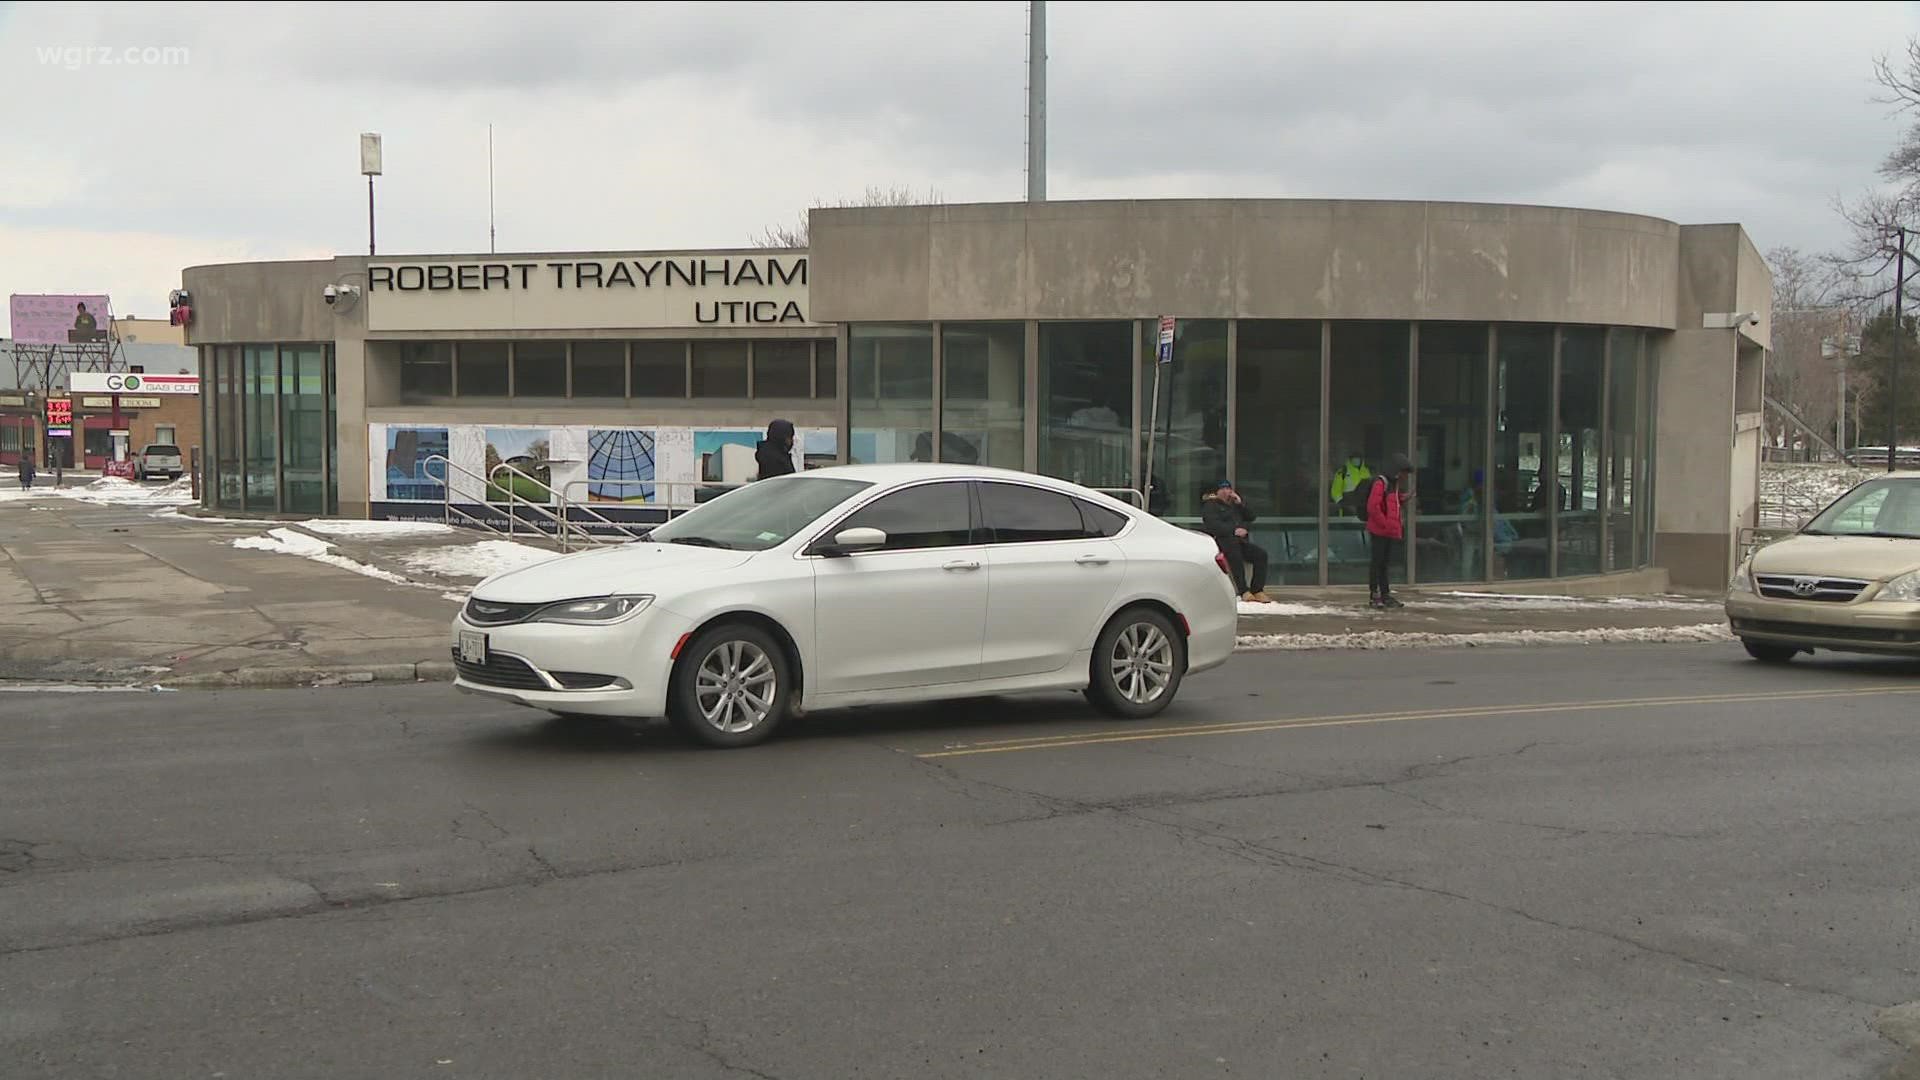 Transit police say it happened around 11 o'clock Sunday morning on the street level of the Utica Station on the corner of Main and Utica in Buffalo.